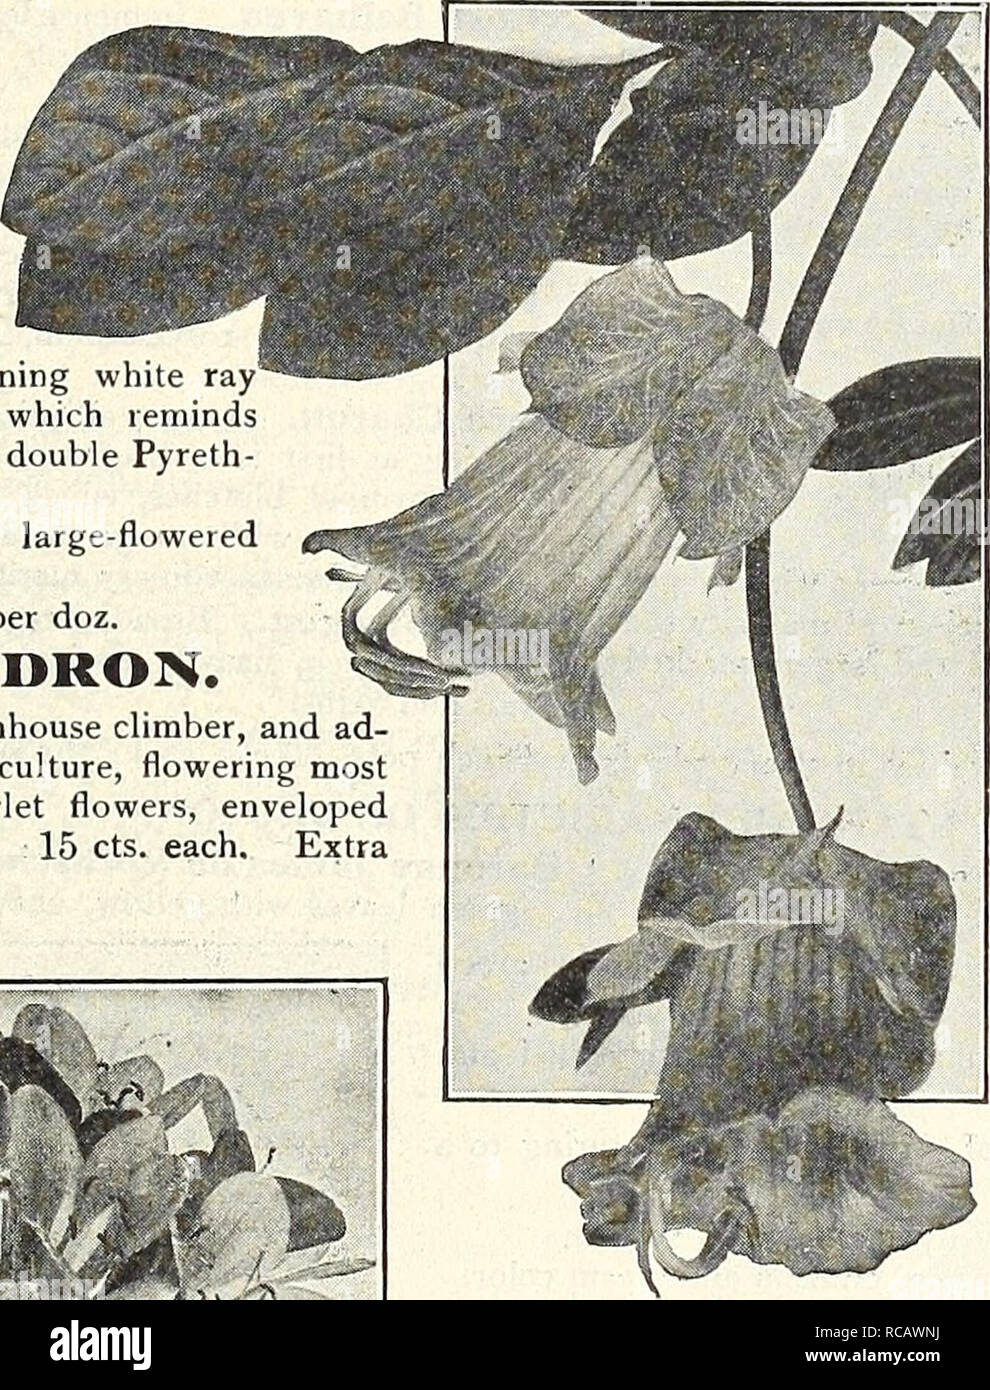 . Dreer's garden book 1916. Seeds Catalogs; Nursery stock Catalogs; Gardening Equipment and supplies Catalogs; Flowers Seeds Catalogs; Vegetables Seeds Catalogs; Fruit Seeds Catalogs. Chrysanthemum Frutescens, Mrs. F. Sander Clivia CEIVIA MINI ATA. (Imantophyllum.) A pretty lily-like plant of the easiest culture, and a most desirable house plant; it flowers during the spring and summer months, remaining in bloom for a long period. The flowers are about 2 inches long, and are borne in dense clusters from 10 to 20 flowers each; in color it is of a fine orange-red shading to buff. Large, strong p Stock Photo